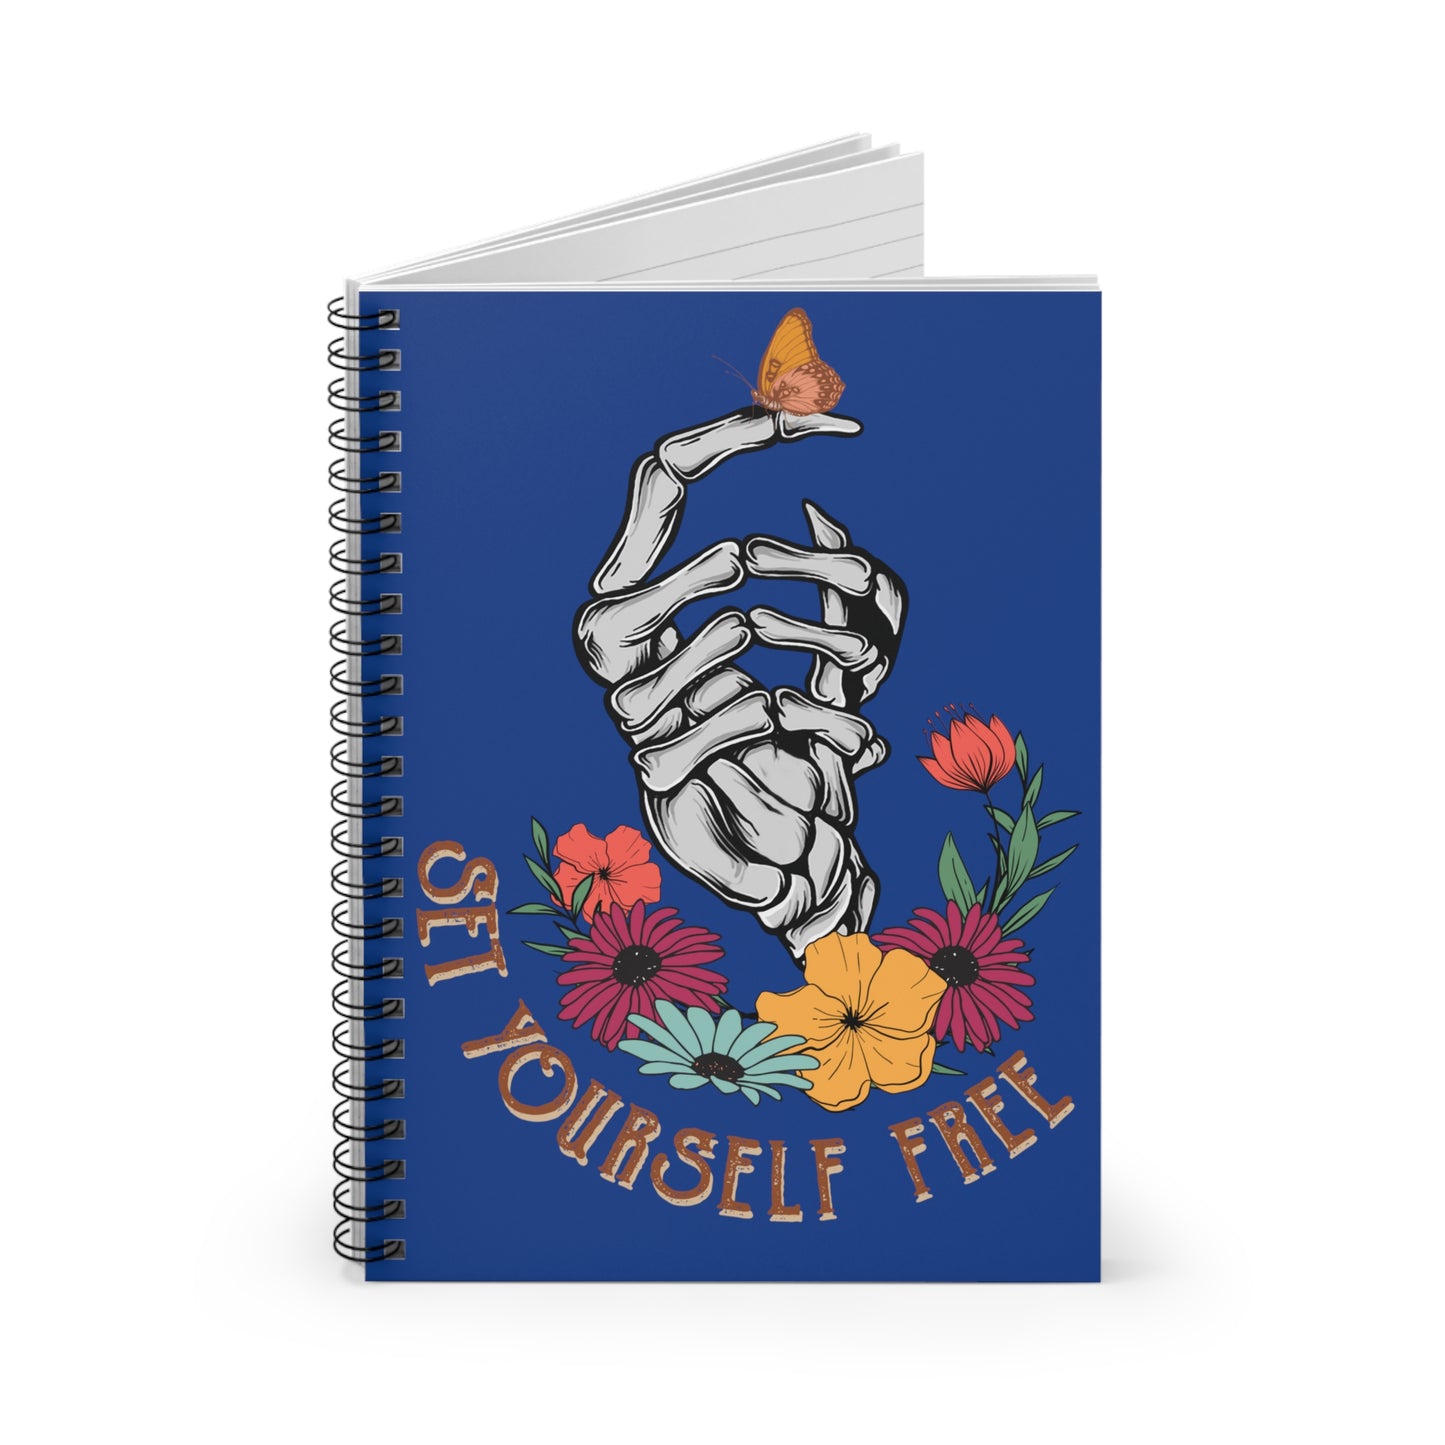 Set Yourself Free Skeleton: Spiral Notebook - Log Books - Journals - Diaries - and More Custom Printed by TheGlassyLass.com